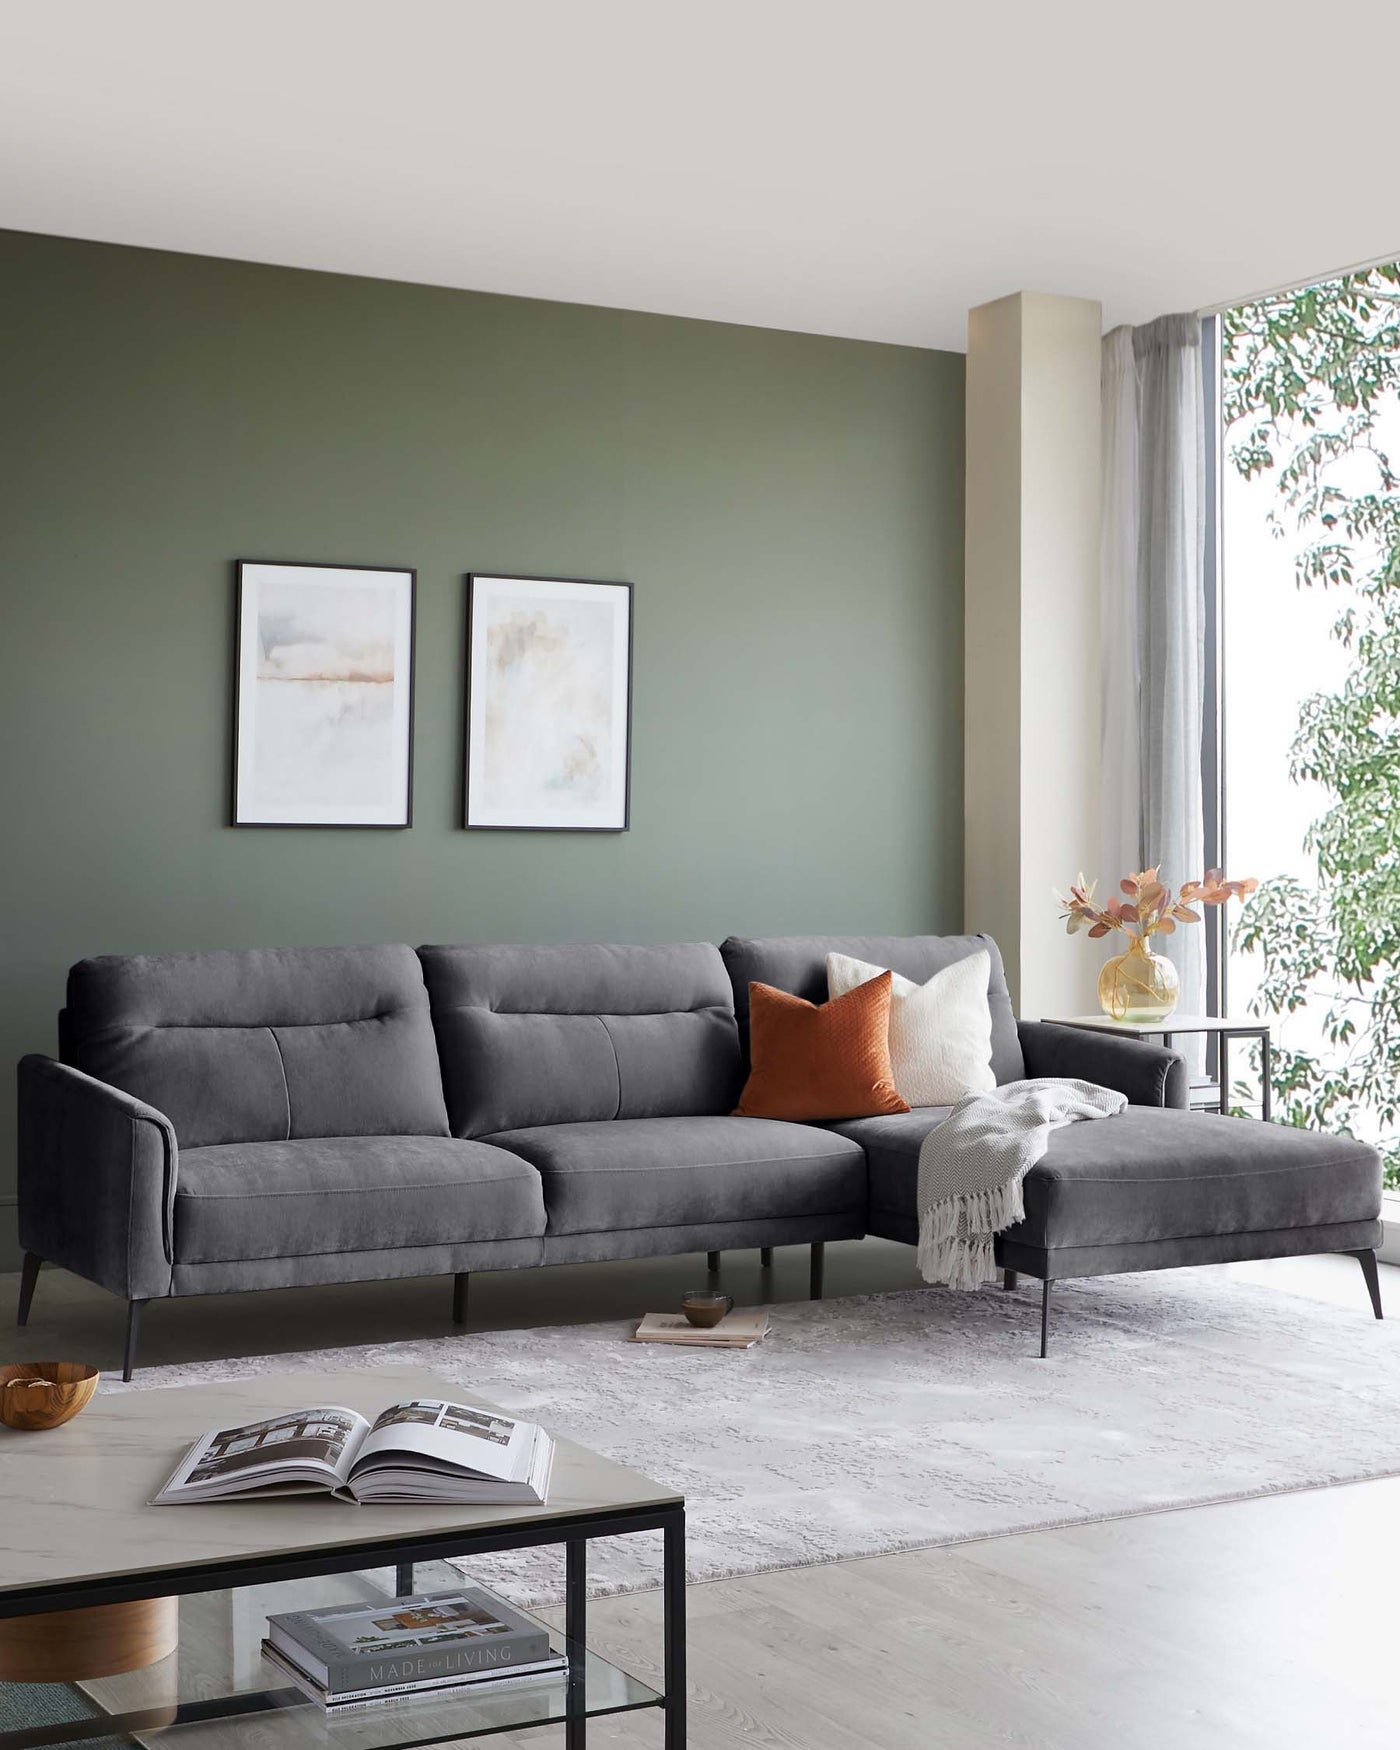 Elegant modern living room with a charcoal grey sectional sofa featuring clean lines, tufted back cushions, and a matching chaise lounge. A sleek black metal-framed coffee table with a glass top and books rests on a textured white area rug.